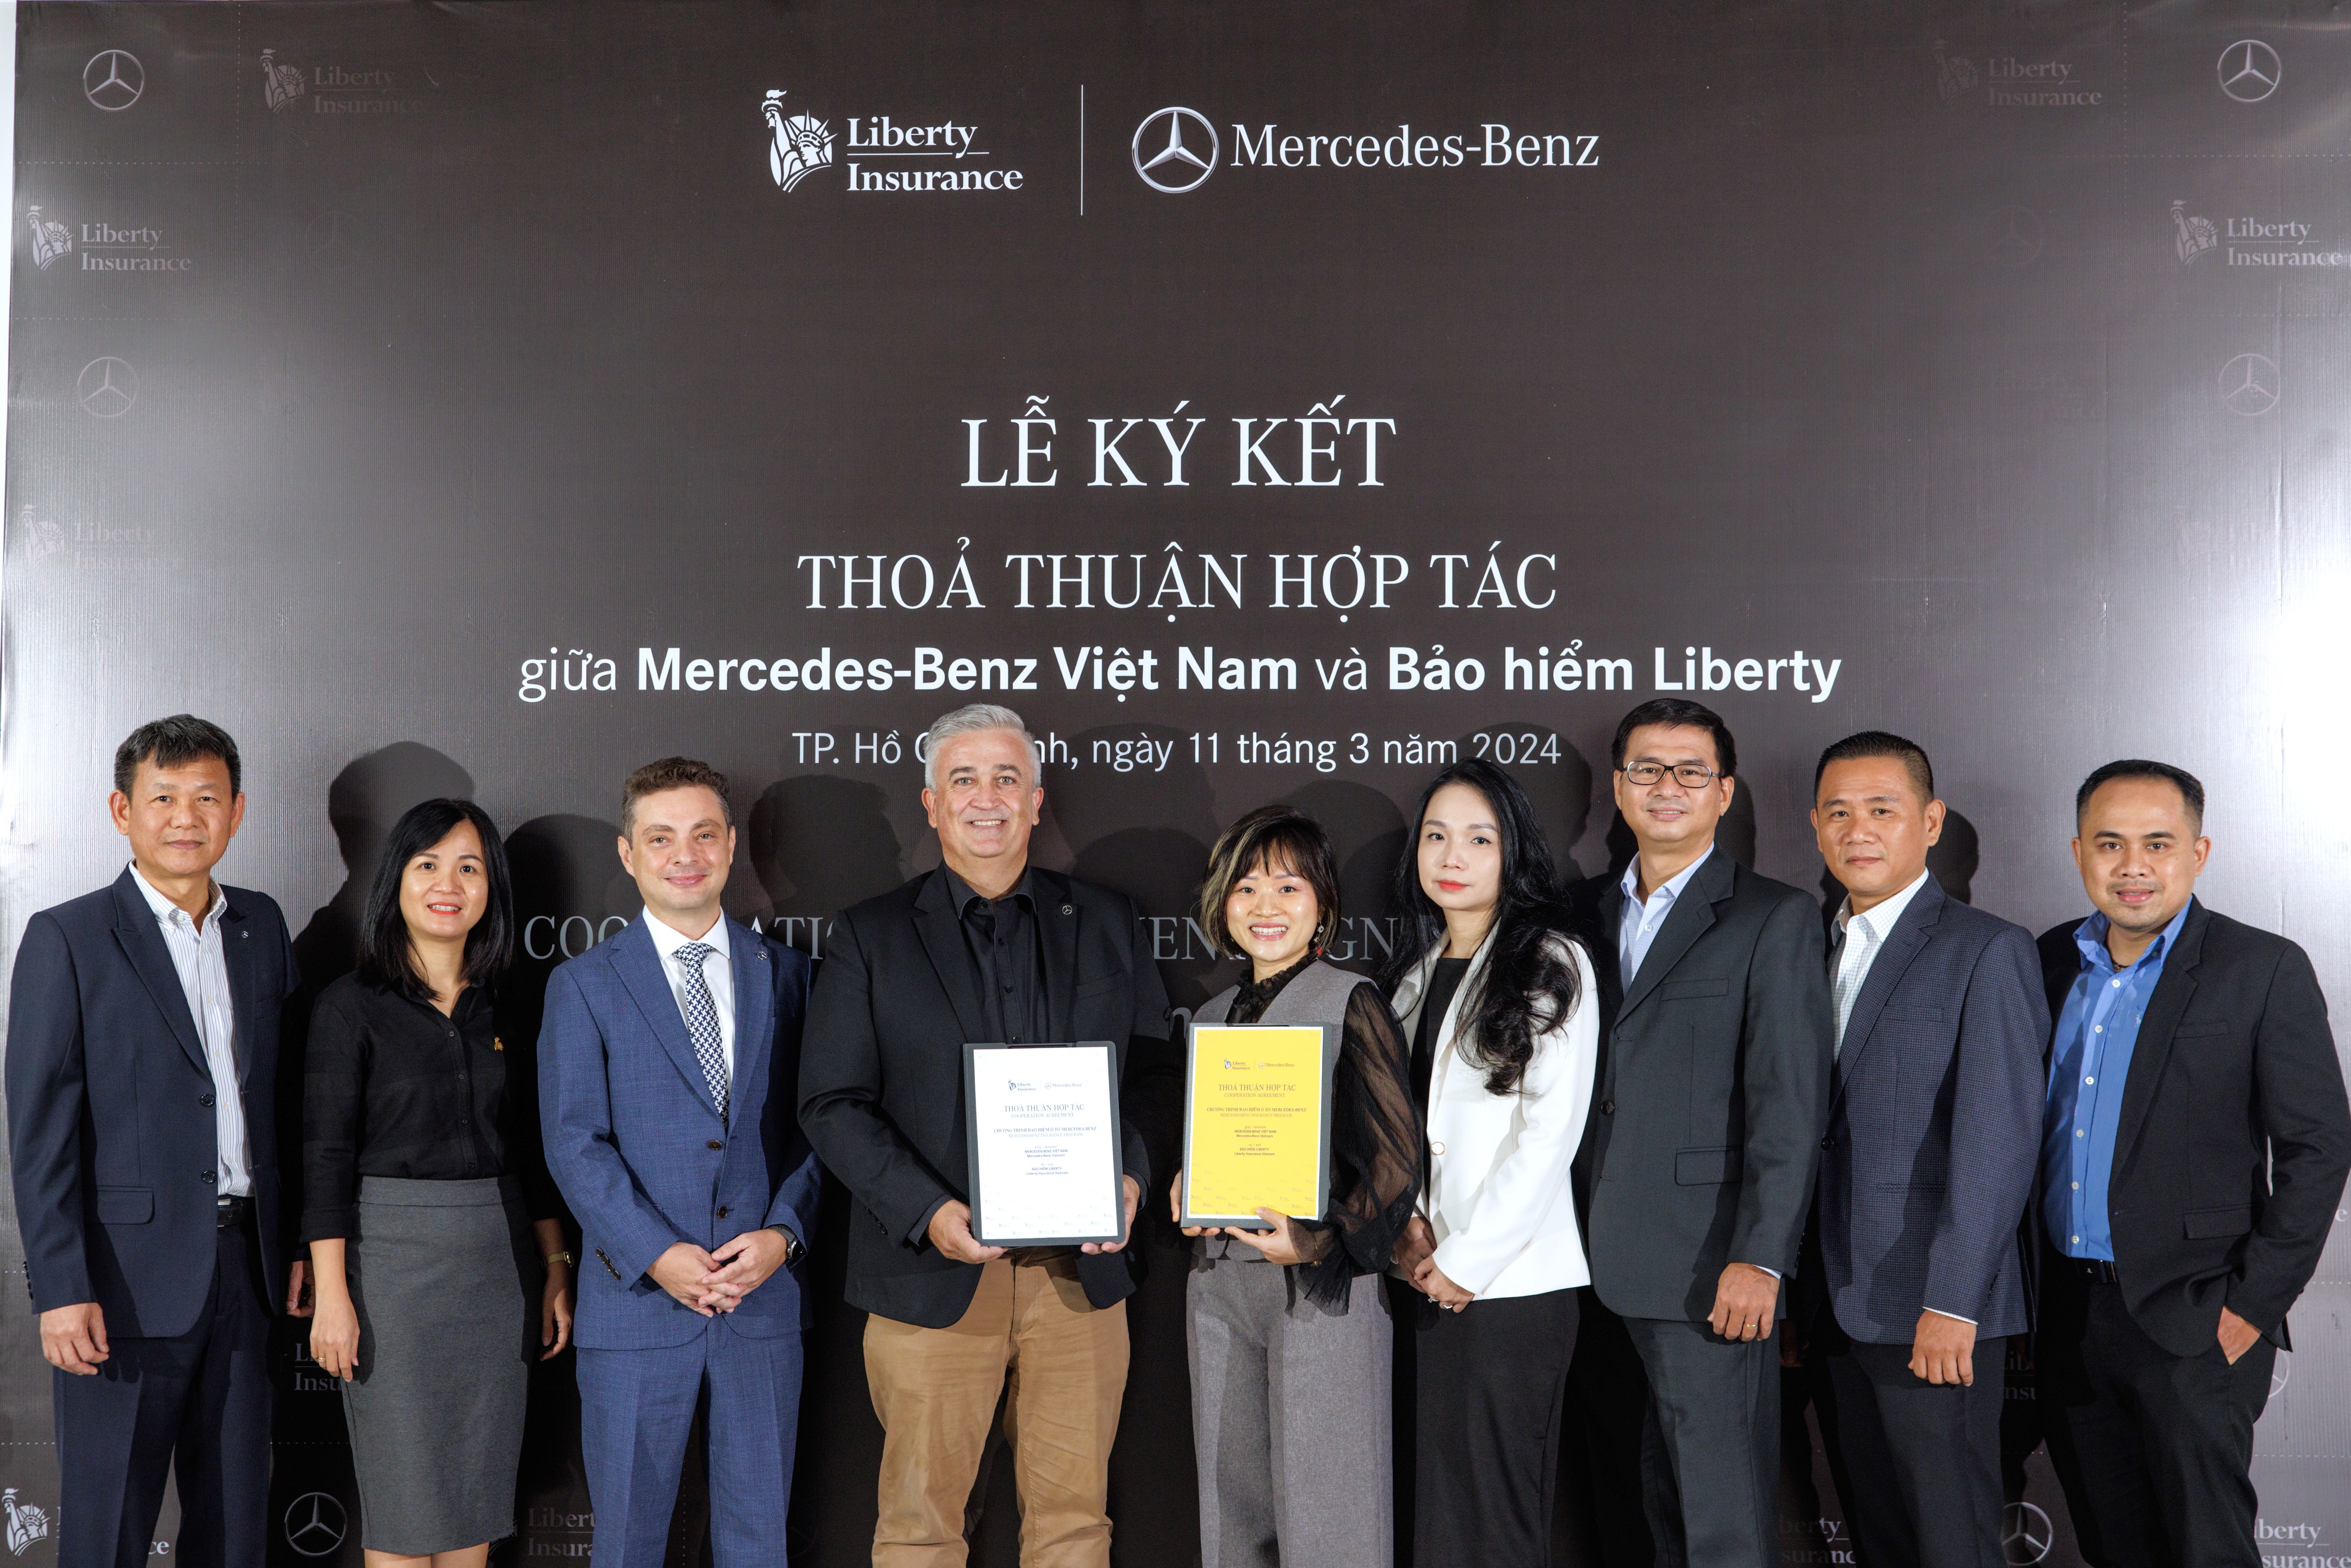 Liberty Insurance Vietnam and Mercedes-Benz Vietnam Officially Sign Cooperation Agreement for the Mercedes-Benz Car Insurance Program